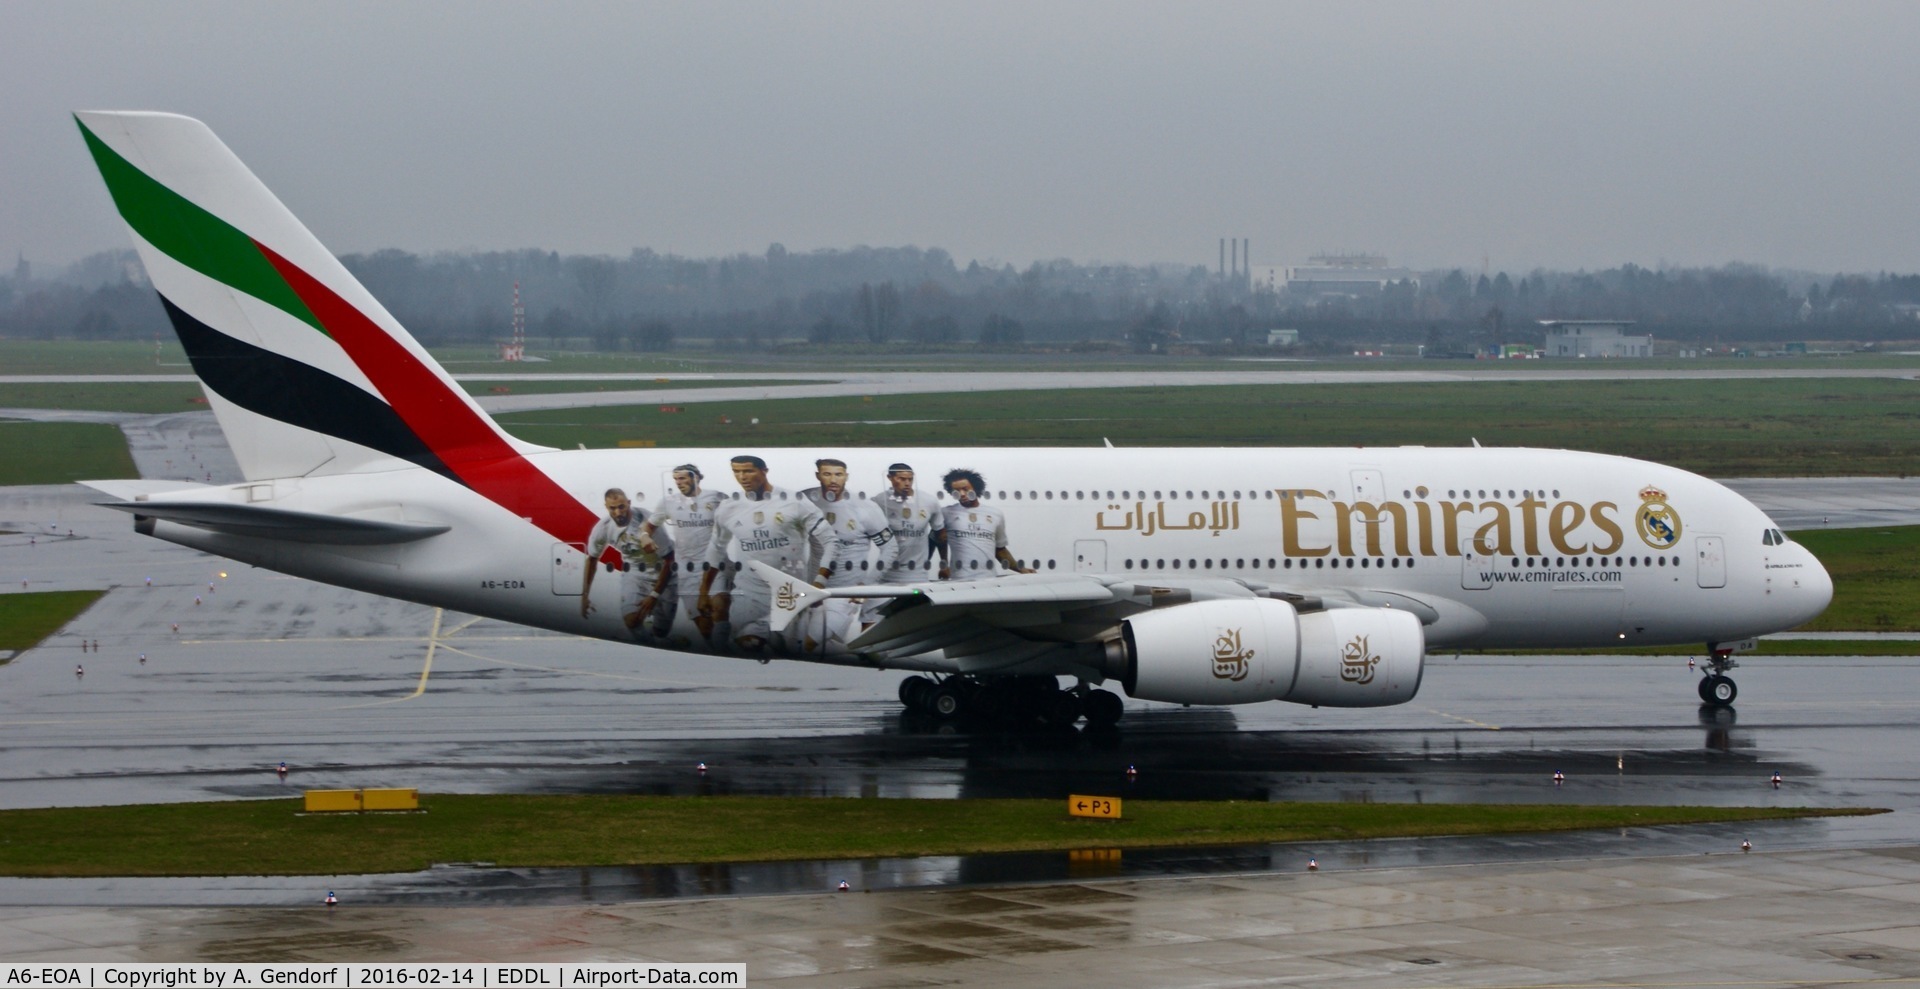 A6-EOA, 2014 Airbus A380-861 C/N 159, Emirates (Real Madrid cs.) is here on taxiway 